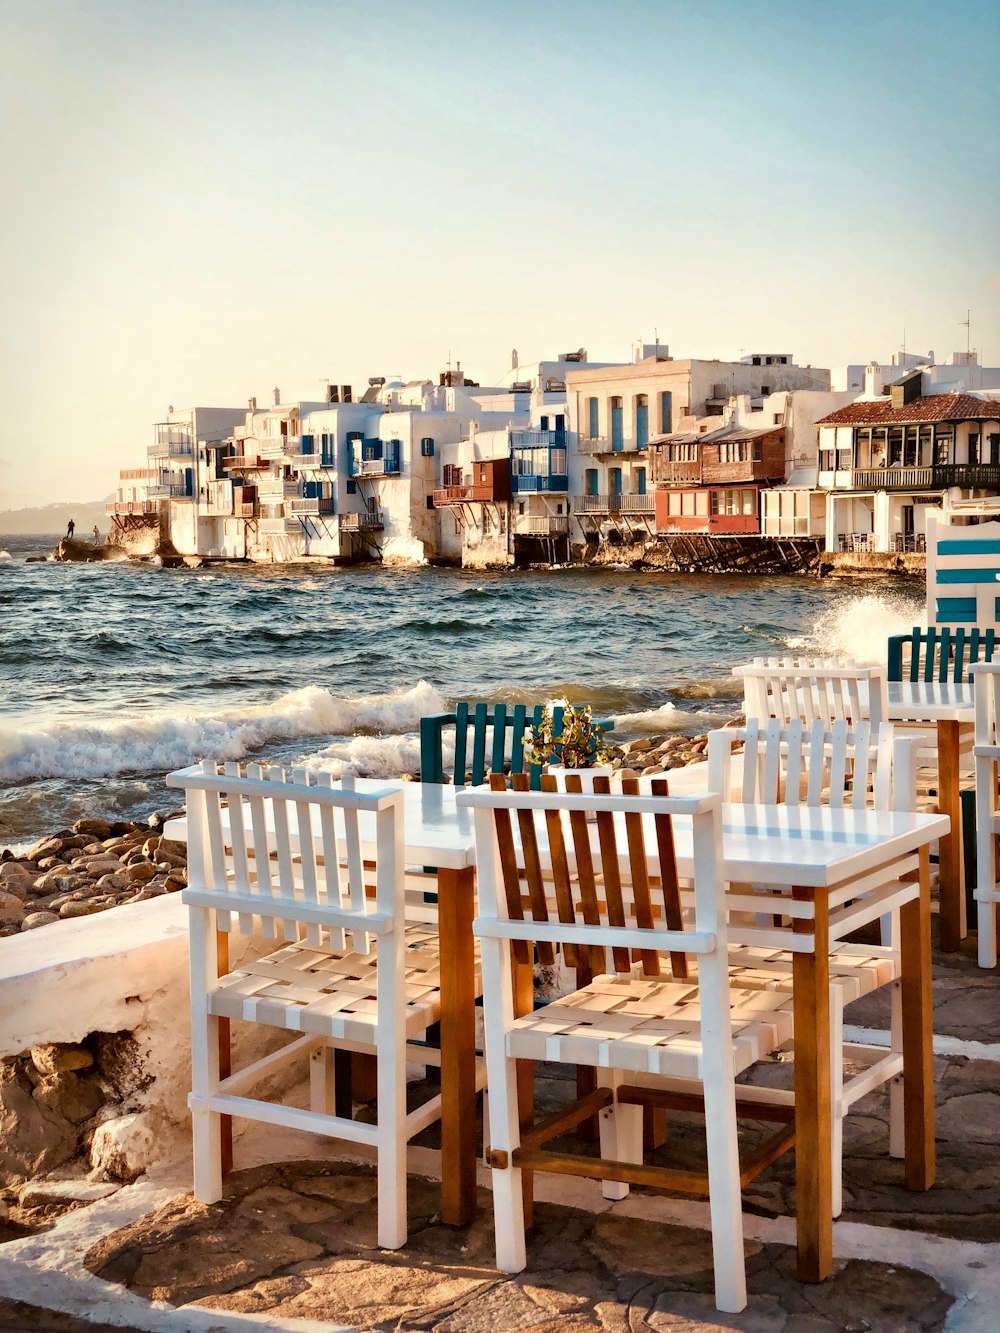 brown wooden chairs on seashore during daytime